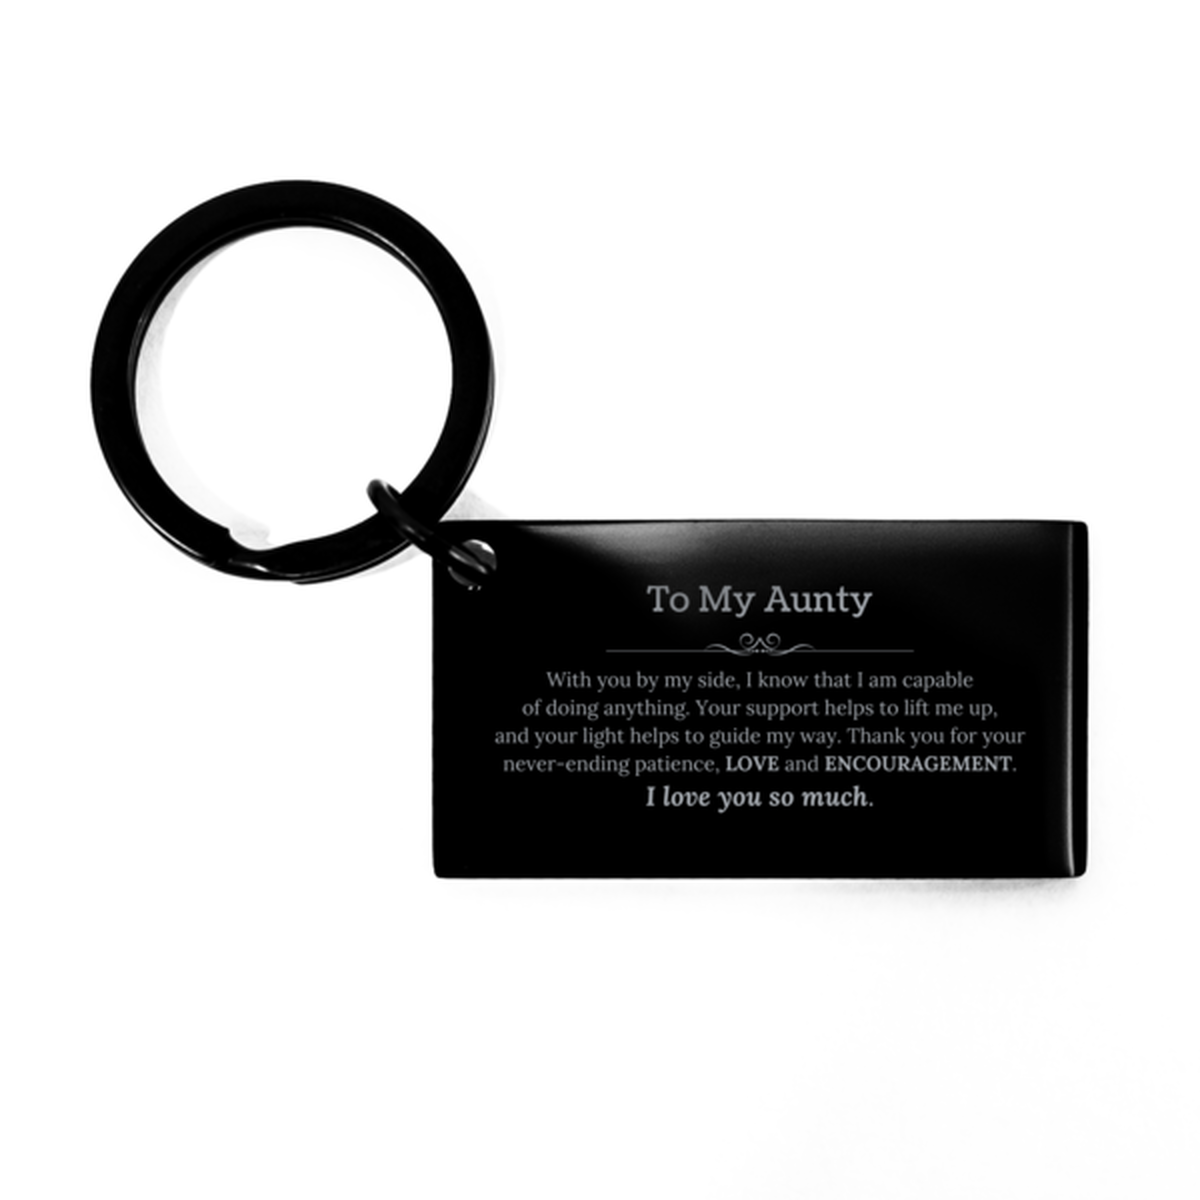 Appreciation Aunty Keychain Gifts, To My Aunty Birthday Christmas Wedding Keepsake Gifts for Aunty With you by my side, I know that I am capable of doing anything. I love you so much